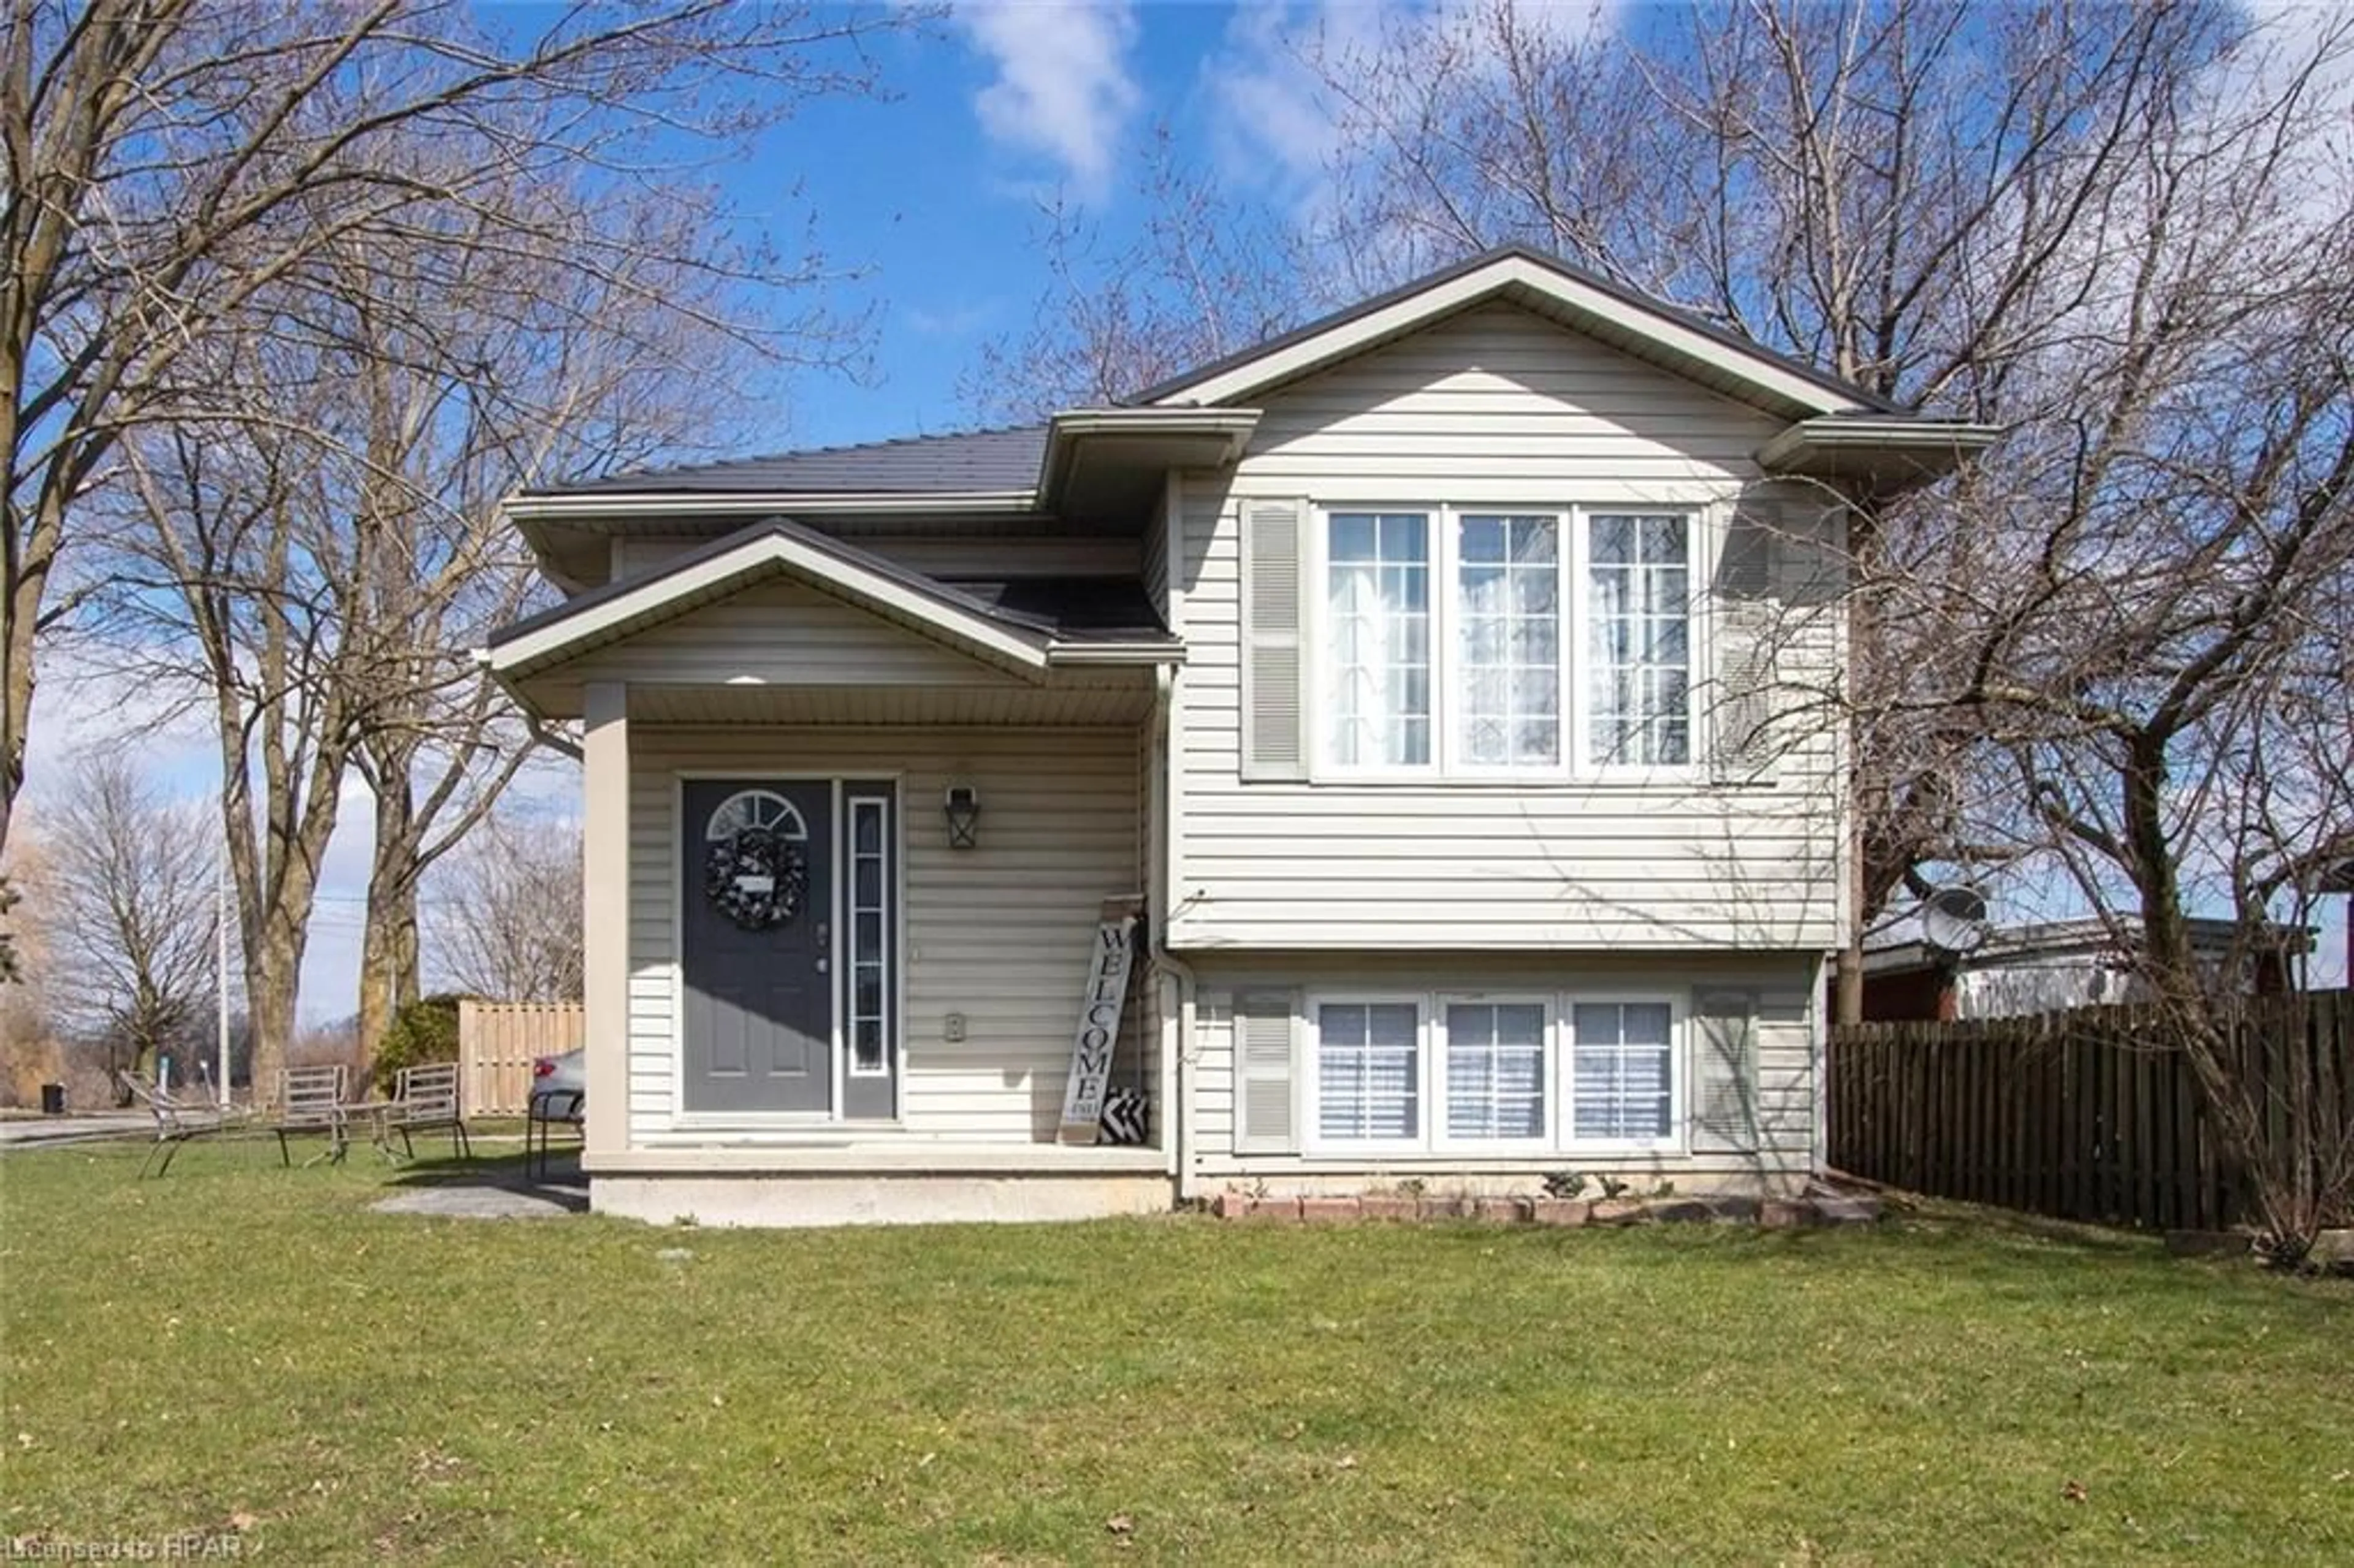 Frontside or backside of a home for 17 Laurier St, Stratford Ontario N5A 4M2